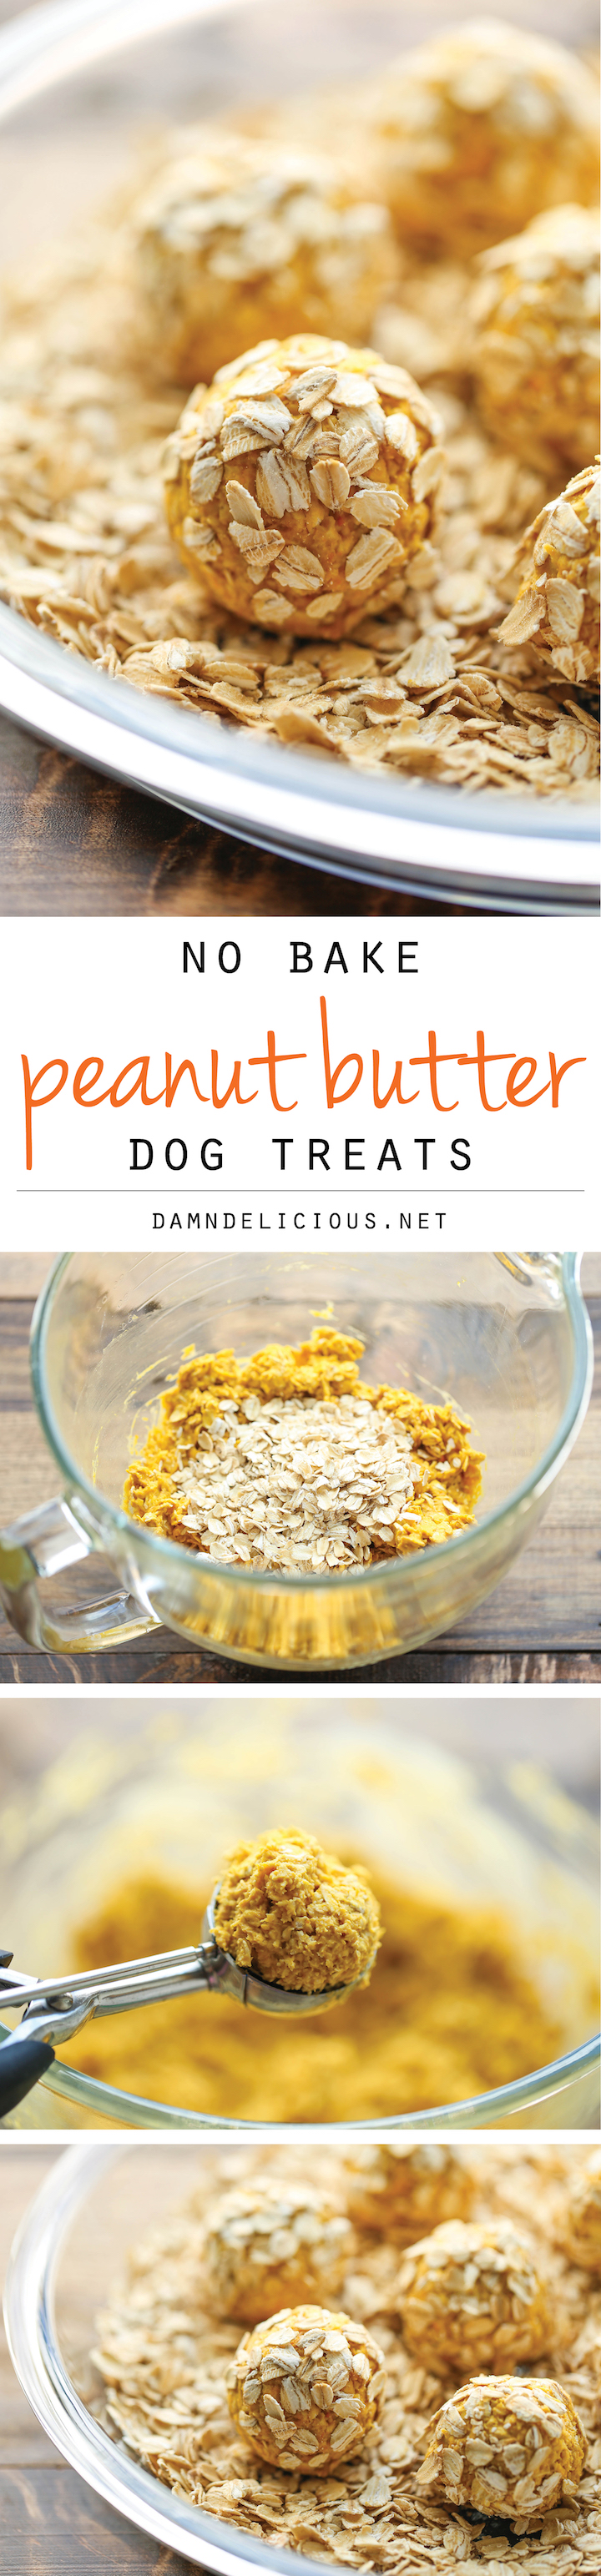 No Bake Peanut Butter Dog Treats - Easy peasy 4-ingredient treats that are sure to be your pup's favorite. And you can whip these up in just 15 min!